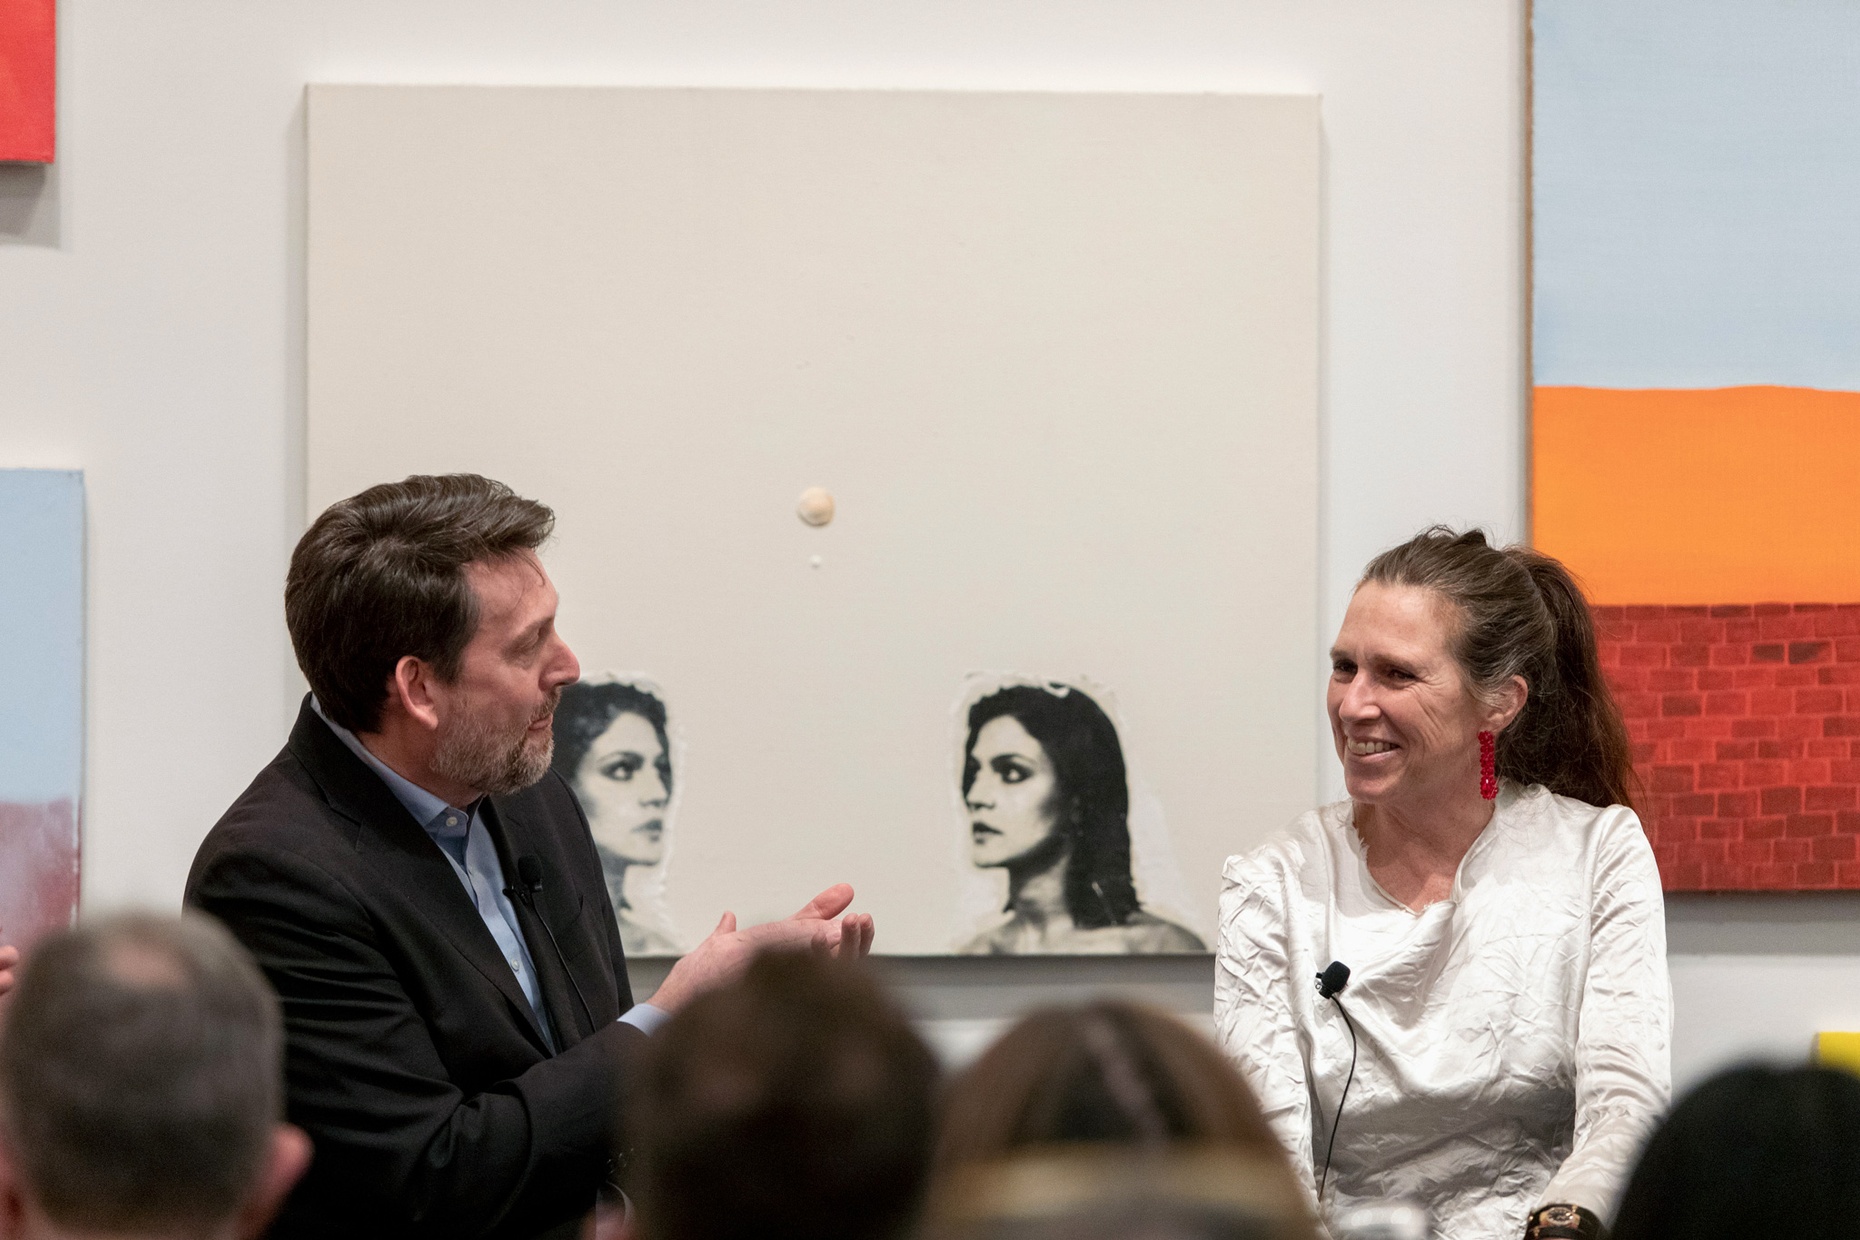 A man speaks with a woman before works of art and in front of a crowd.